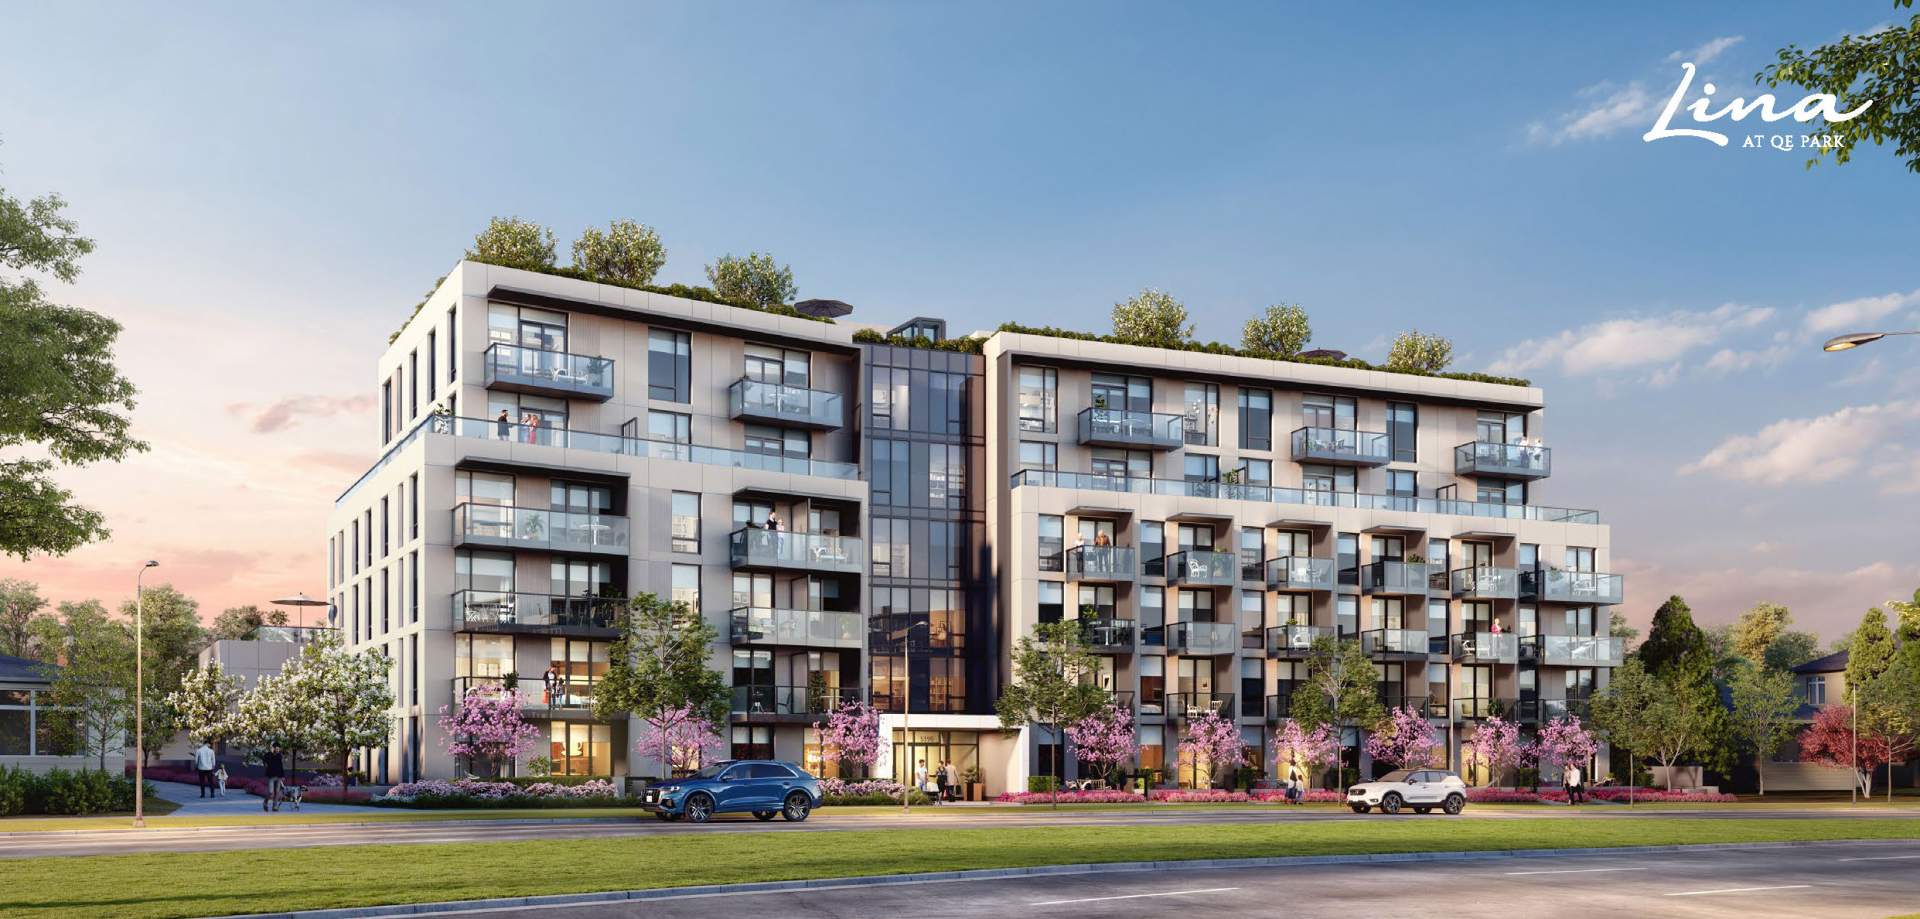 A collection of studio, 1-, 2- and 3-bedroom homes located next to Queen Elizabeth Park.